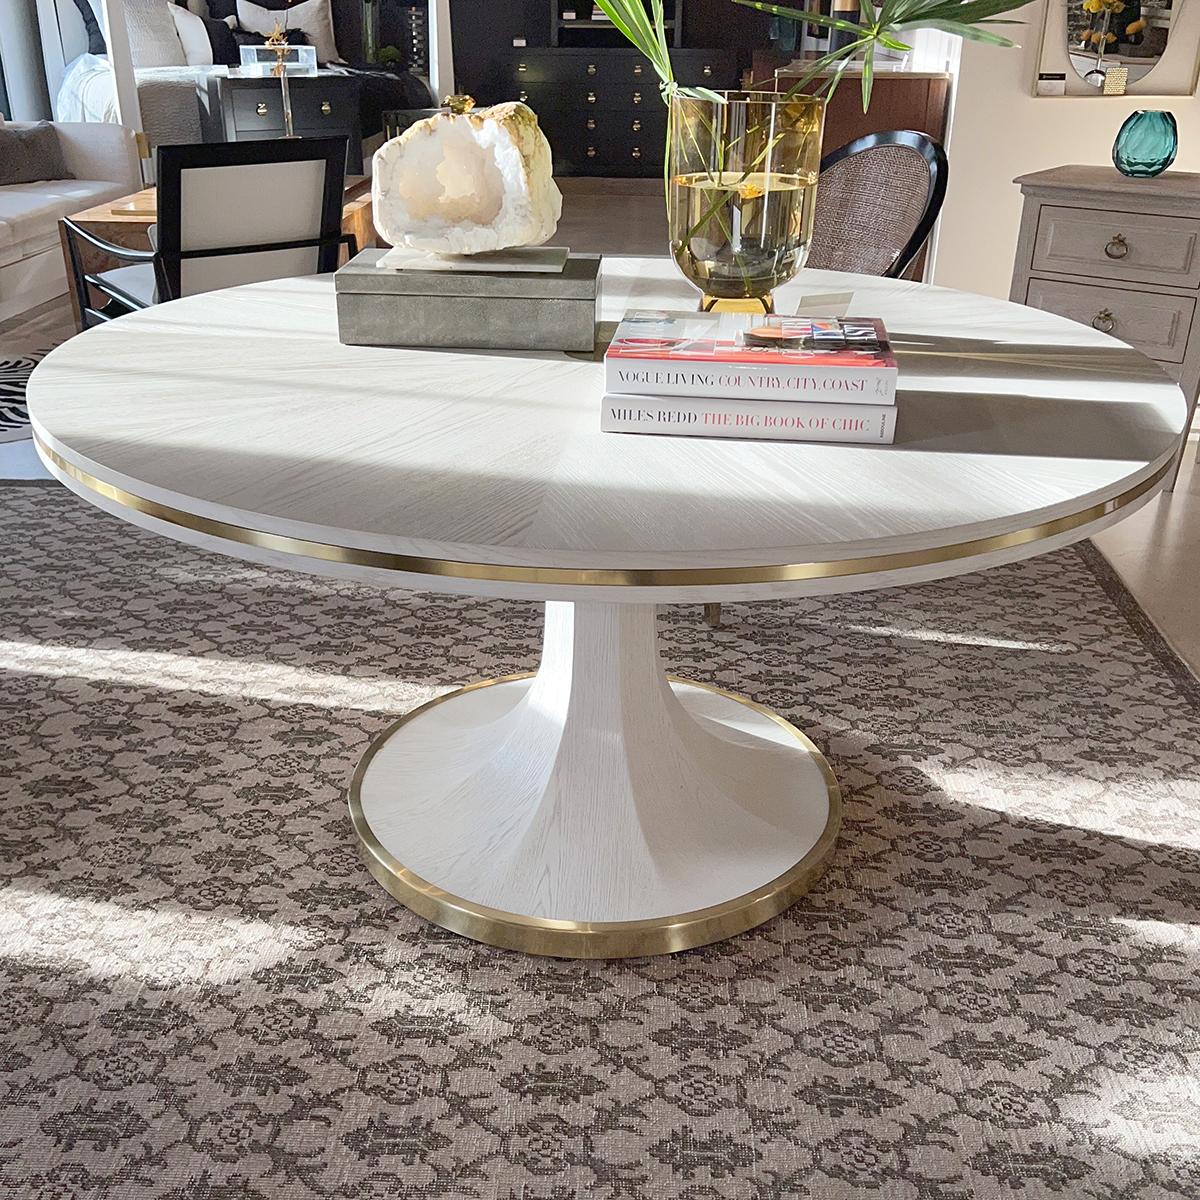 Introducing the Art Deco White Dining Table. With its whitewash oak veneer and rayed top centered by an antiqued brass round applique.

The top with brass inlaid trim is raised on a tapered octagonal pedestal with a round brass mounted base that